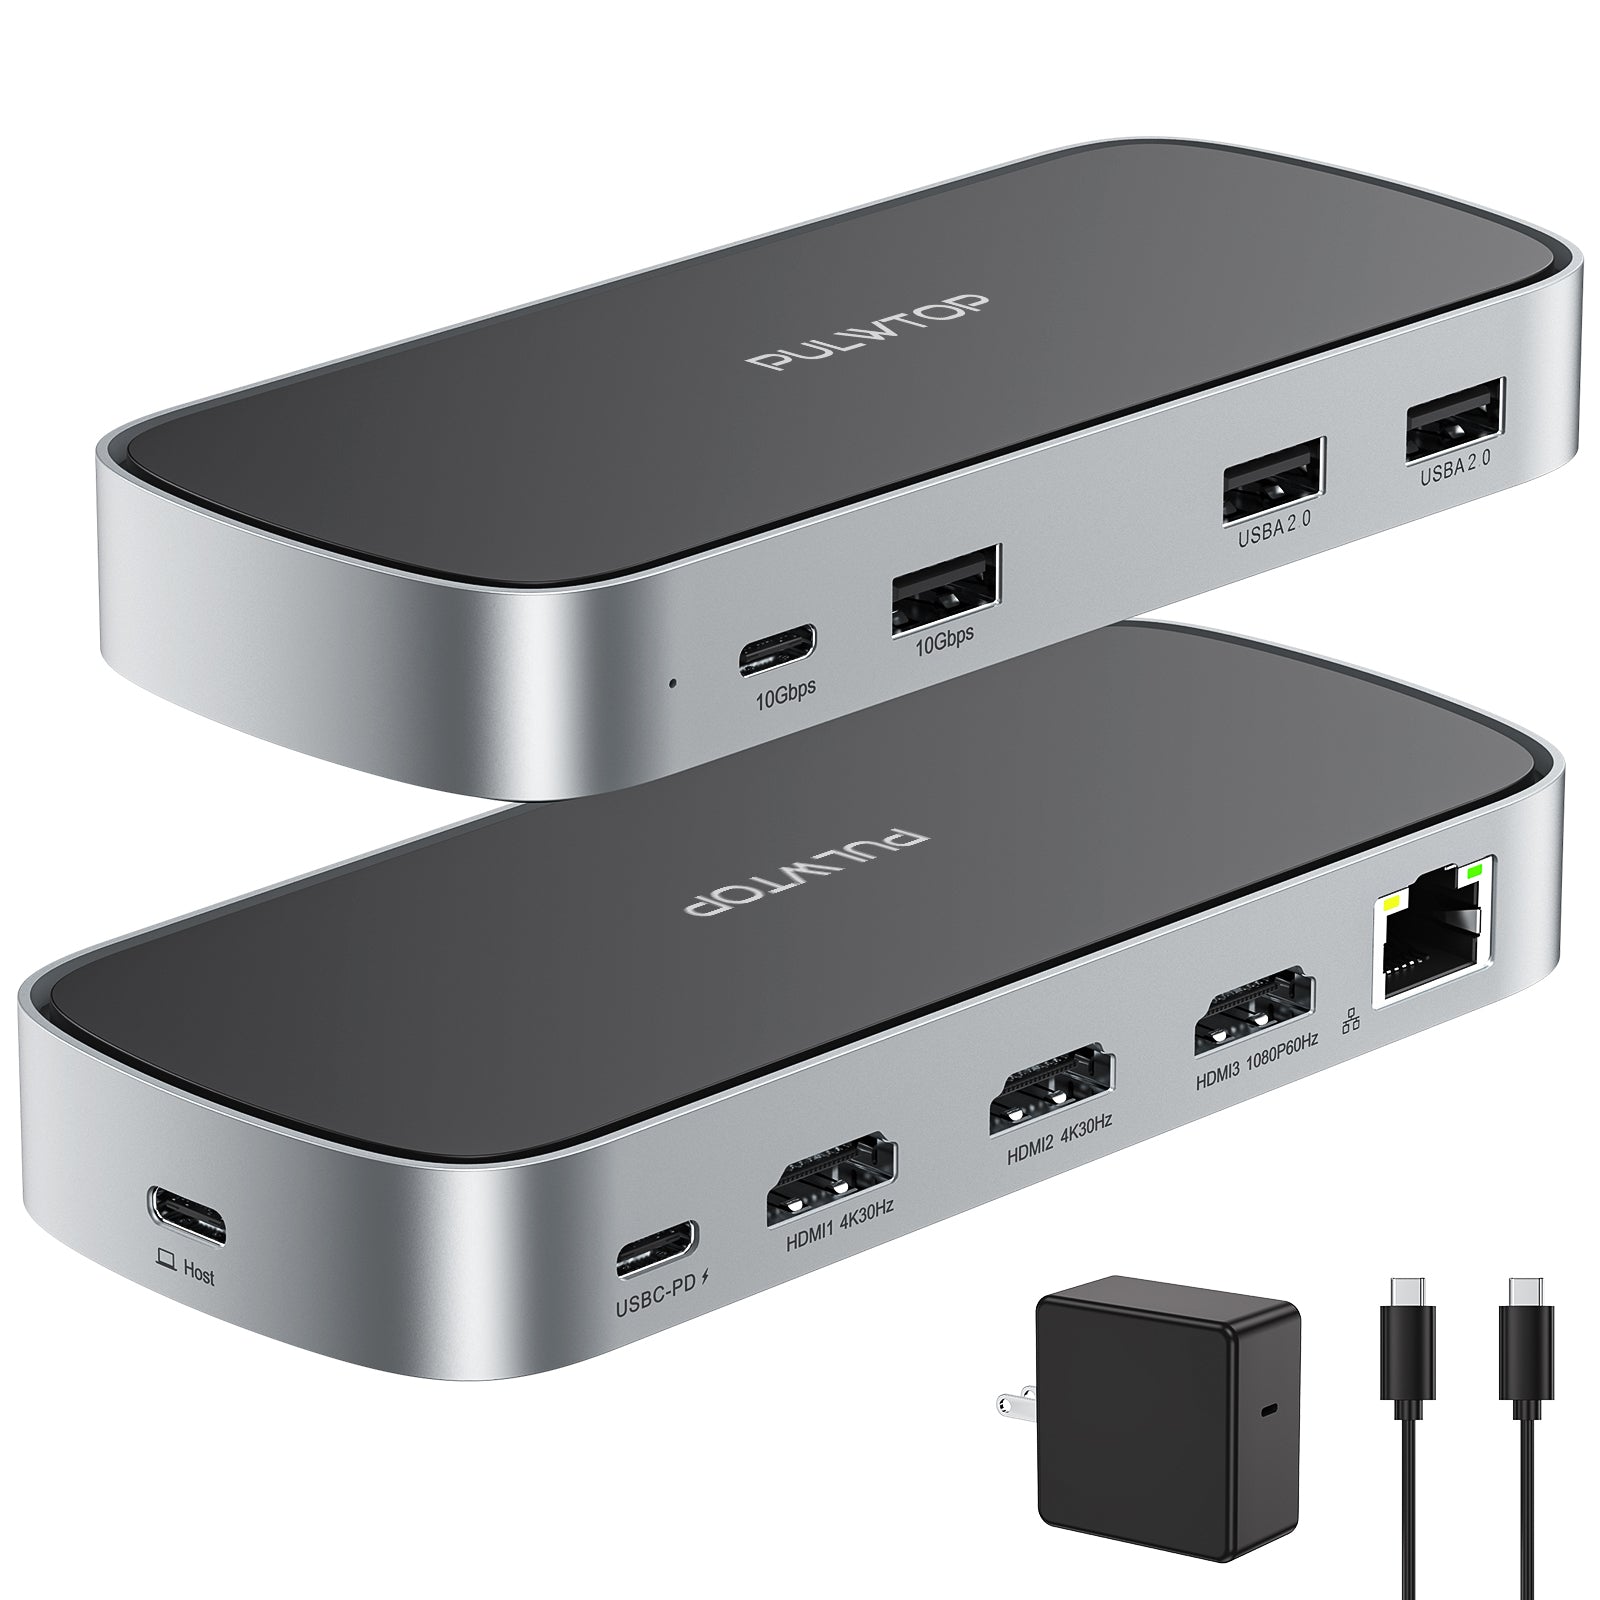 PULWTOP Triple Display USB C Dock with 65W Power Adapter, 9-in-1 Dock for M1/M2/macOS/Windows